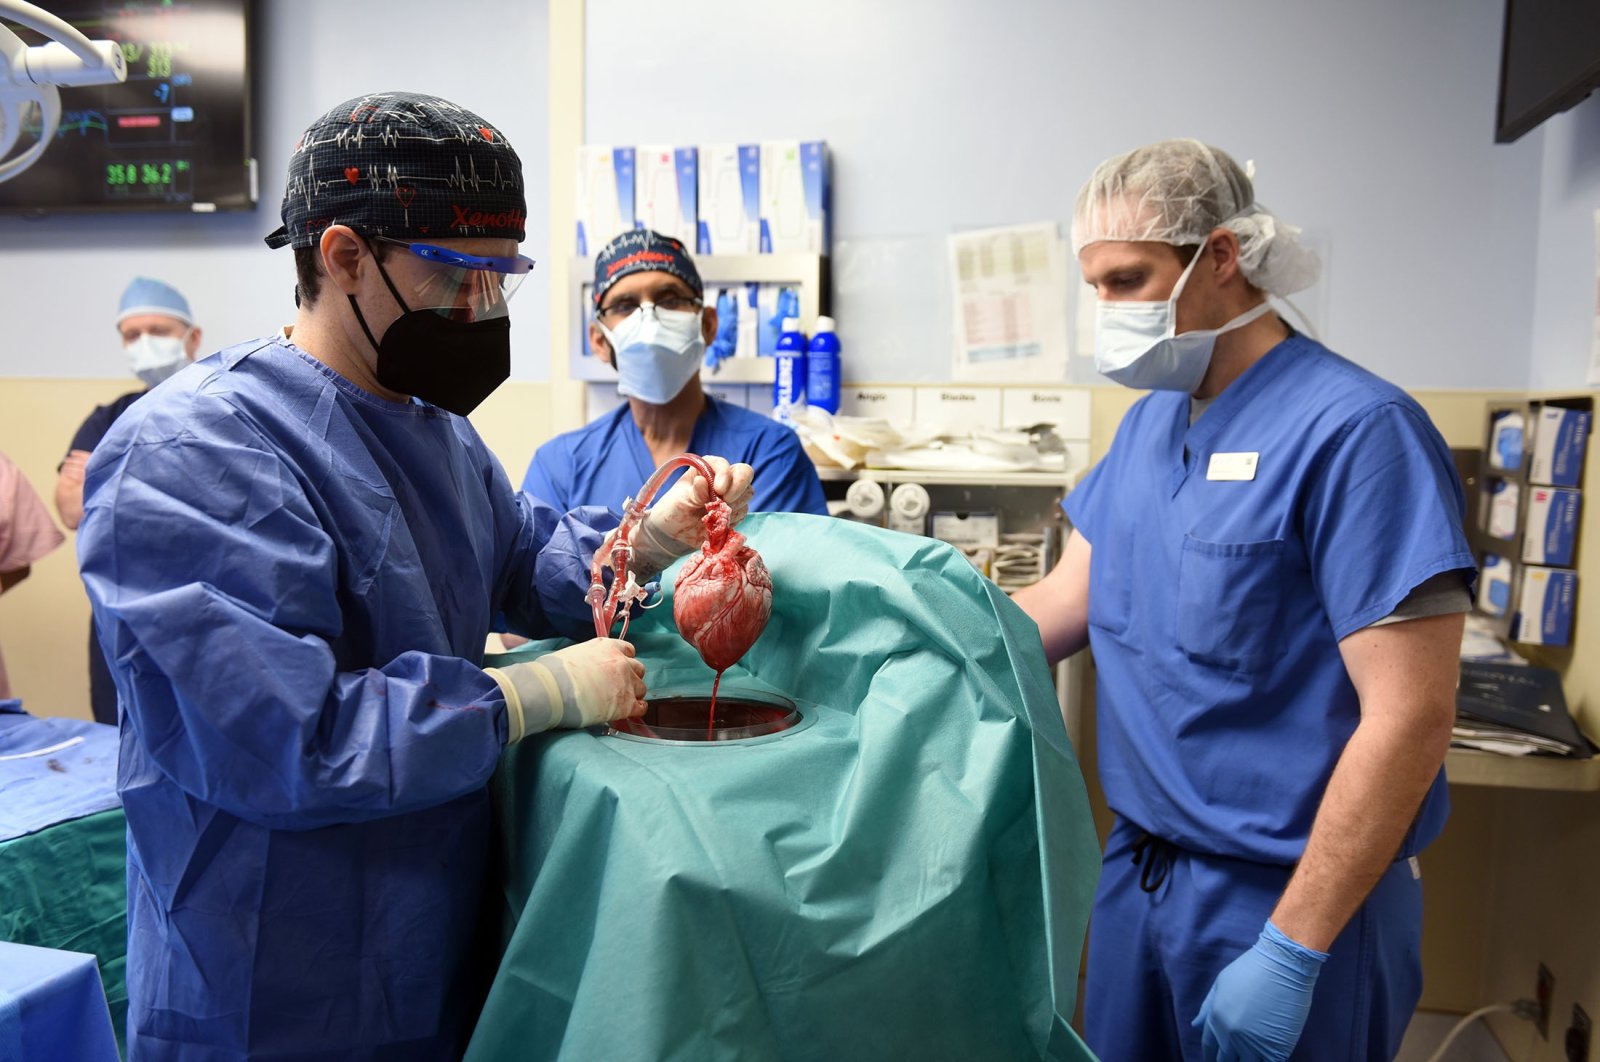 Surgeon Muhammad M. Mohiuddin (C), leads a team as they handle a genetically-modified pig heart in a first-of-its-kind surgery, at the University of Maryland Medical Center in Baltimore, Maryland, U.S., Jan. 7, 2022. (EPA Photo)